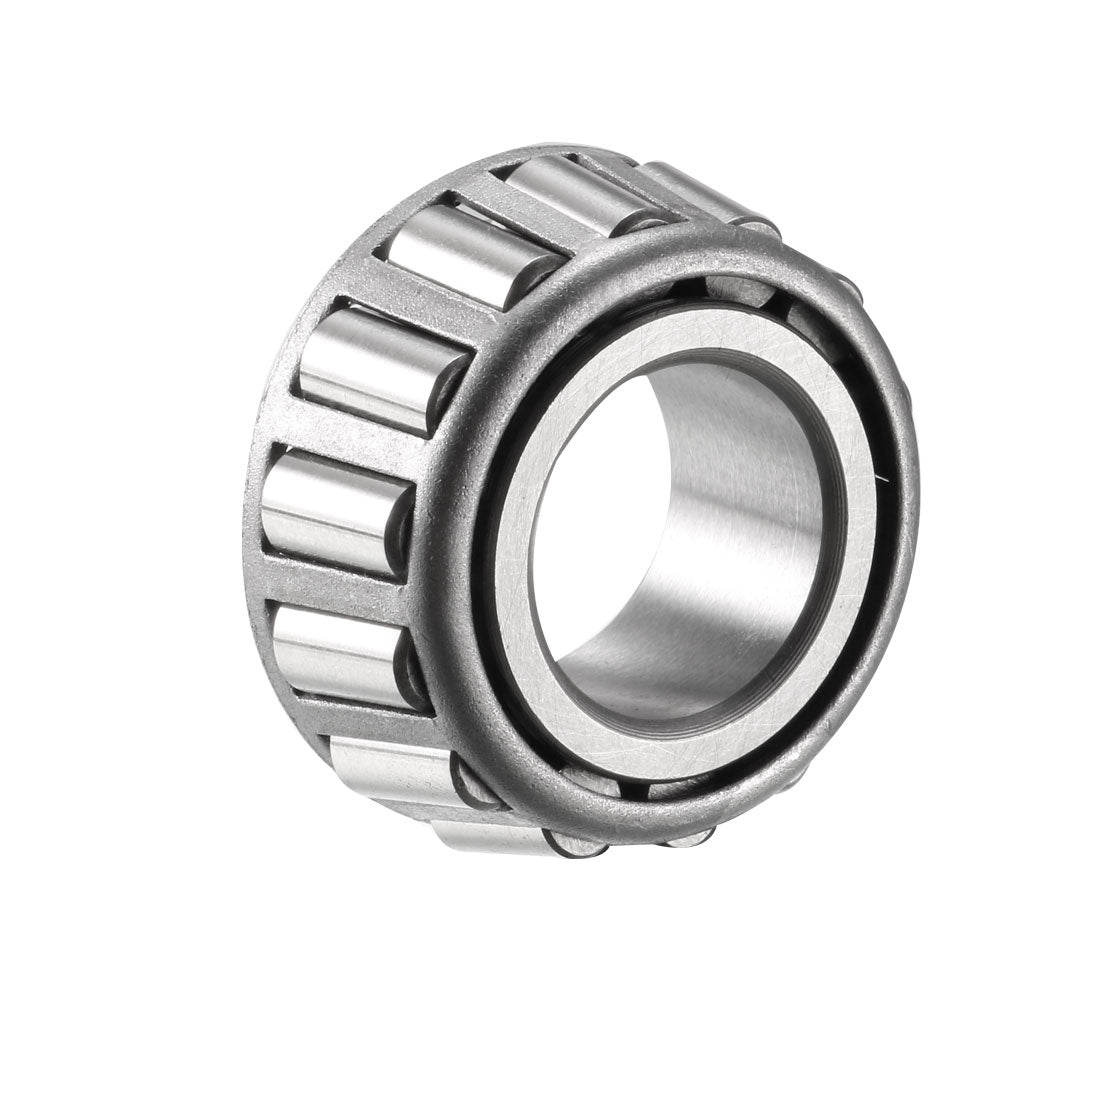 Uxcell Uxcell LM11749 Tapered Roller Bearing Single Cone 0.6875" Bore 0.575" Width 2pcs